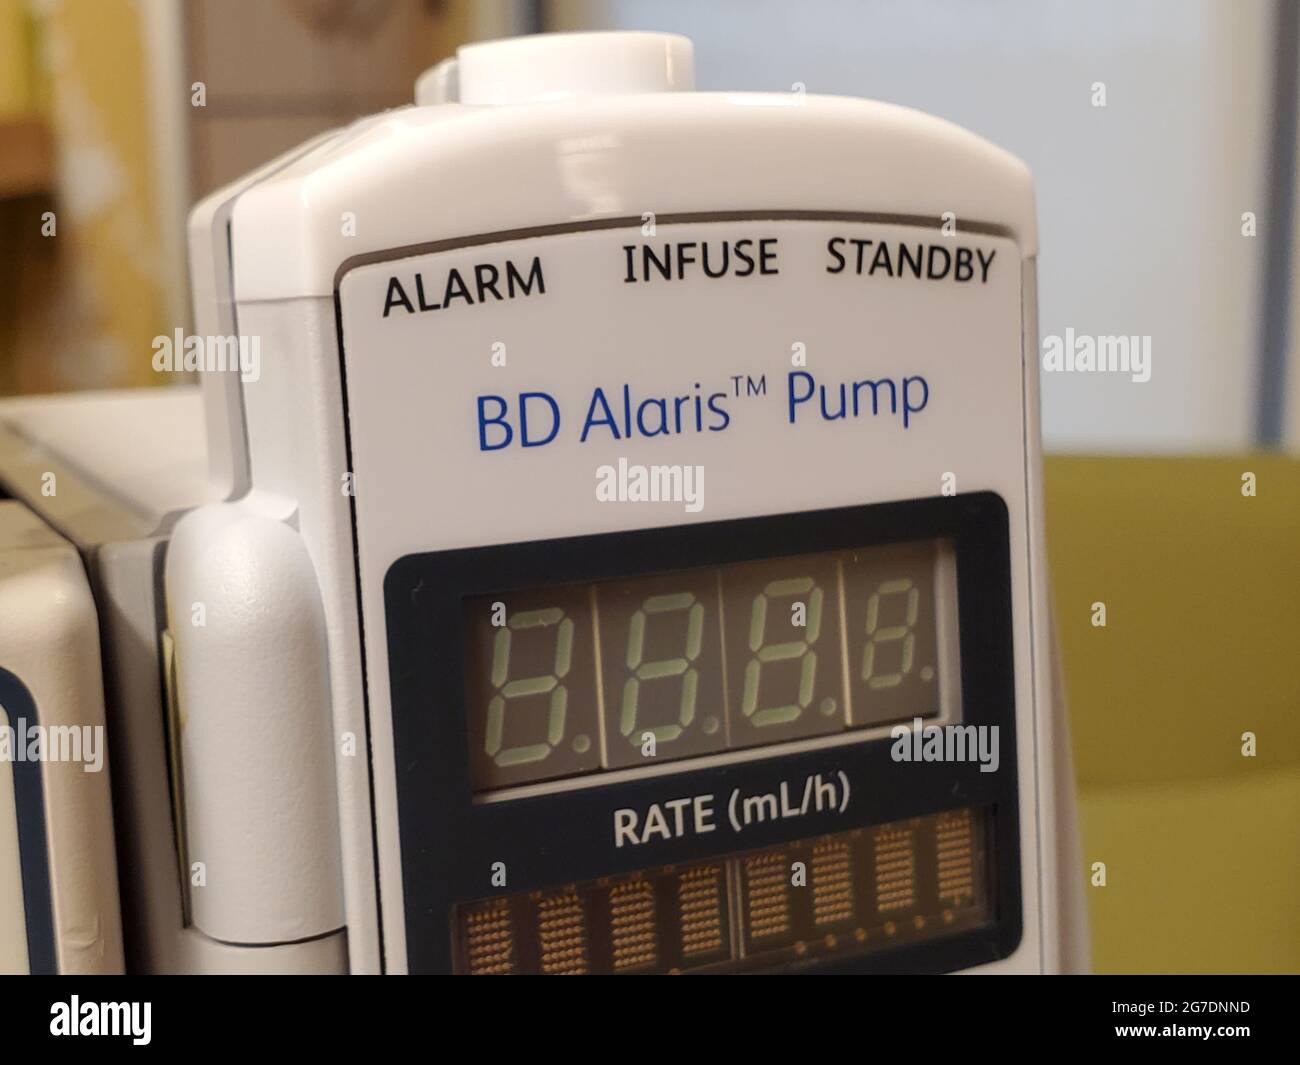 Close-up shot of the BD Alaris IV infusion pump with a digital display in a medical setting in San Francisco, California, April 18, 2021. () Stock Photo